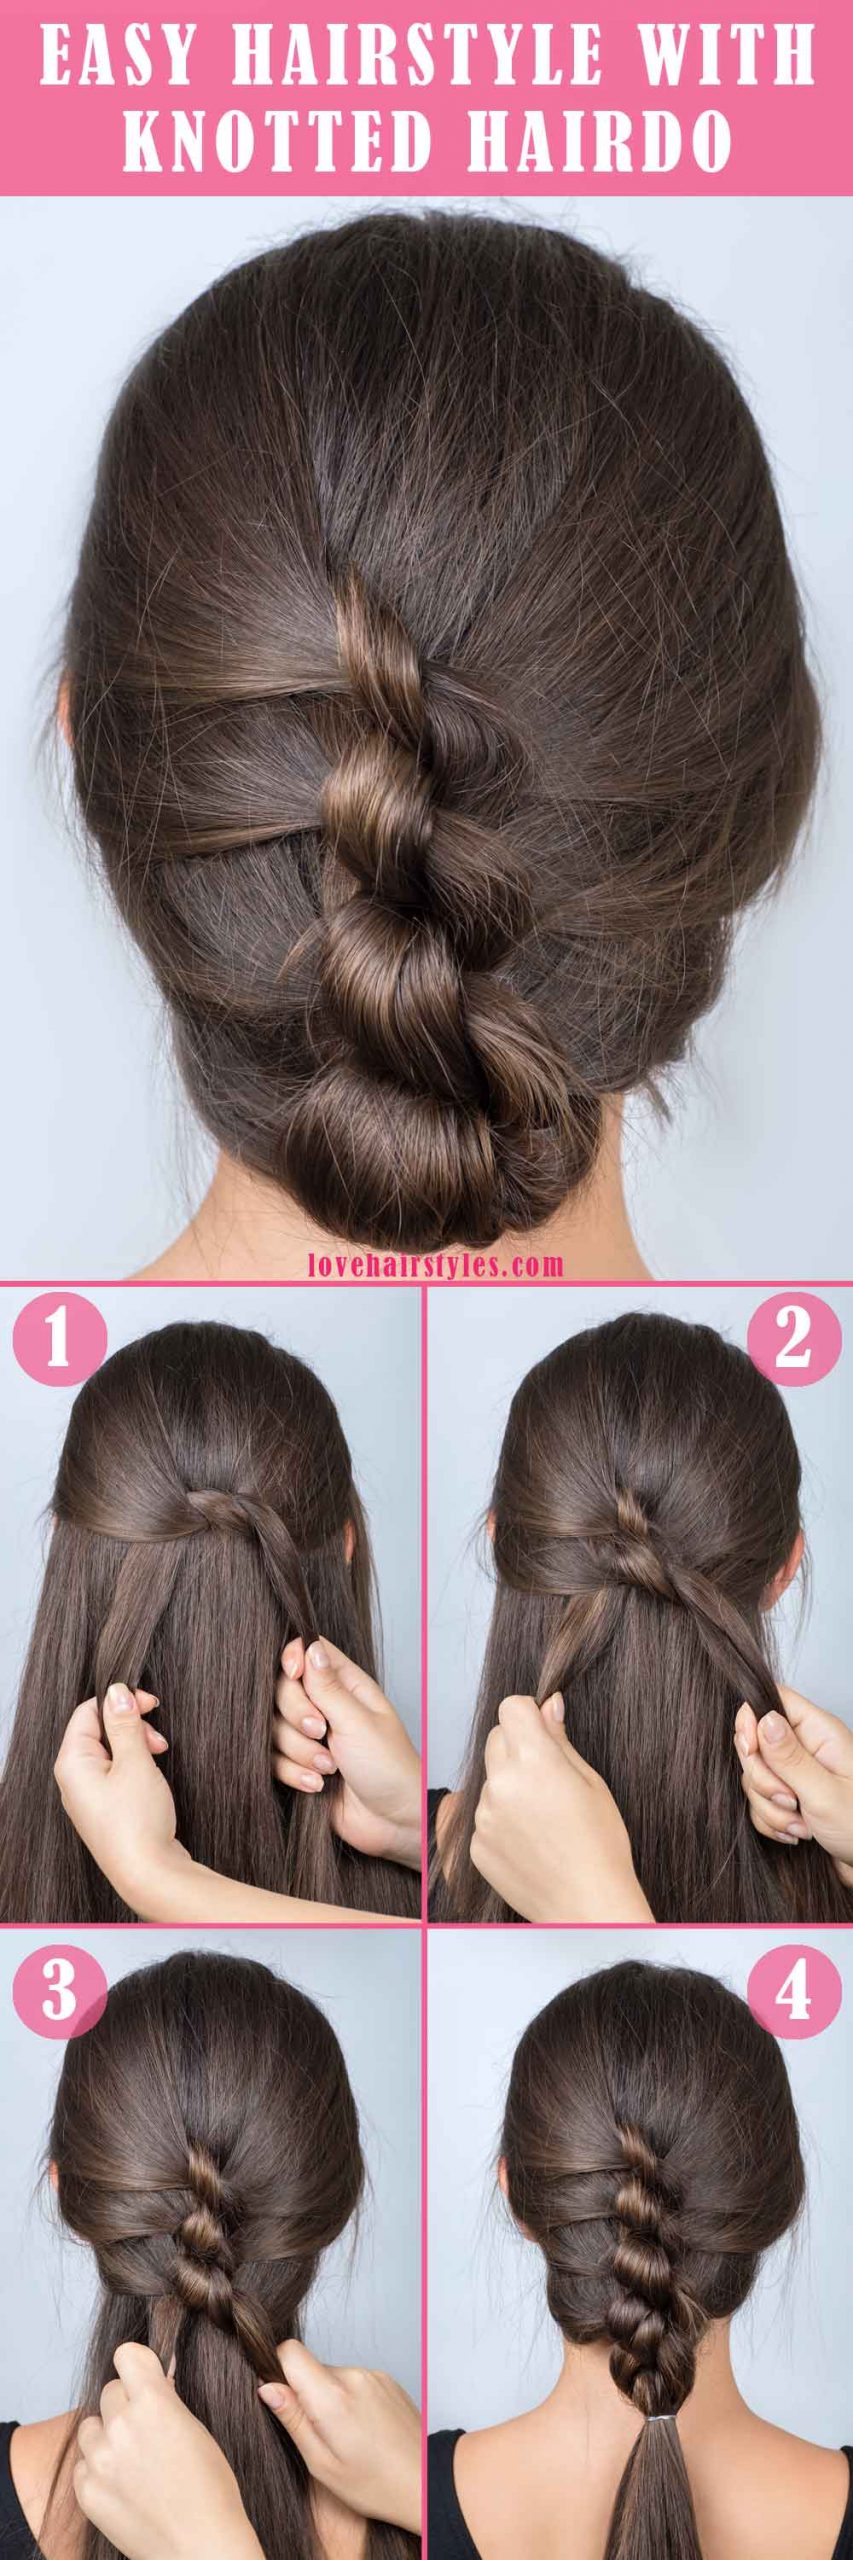 38 Easy Back to School Hairstyle Ideas 2021 – Cute Hairstyles for School